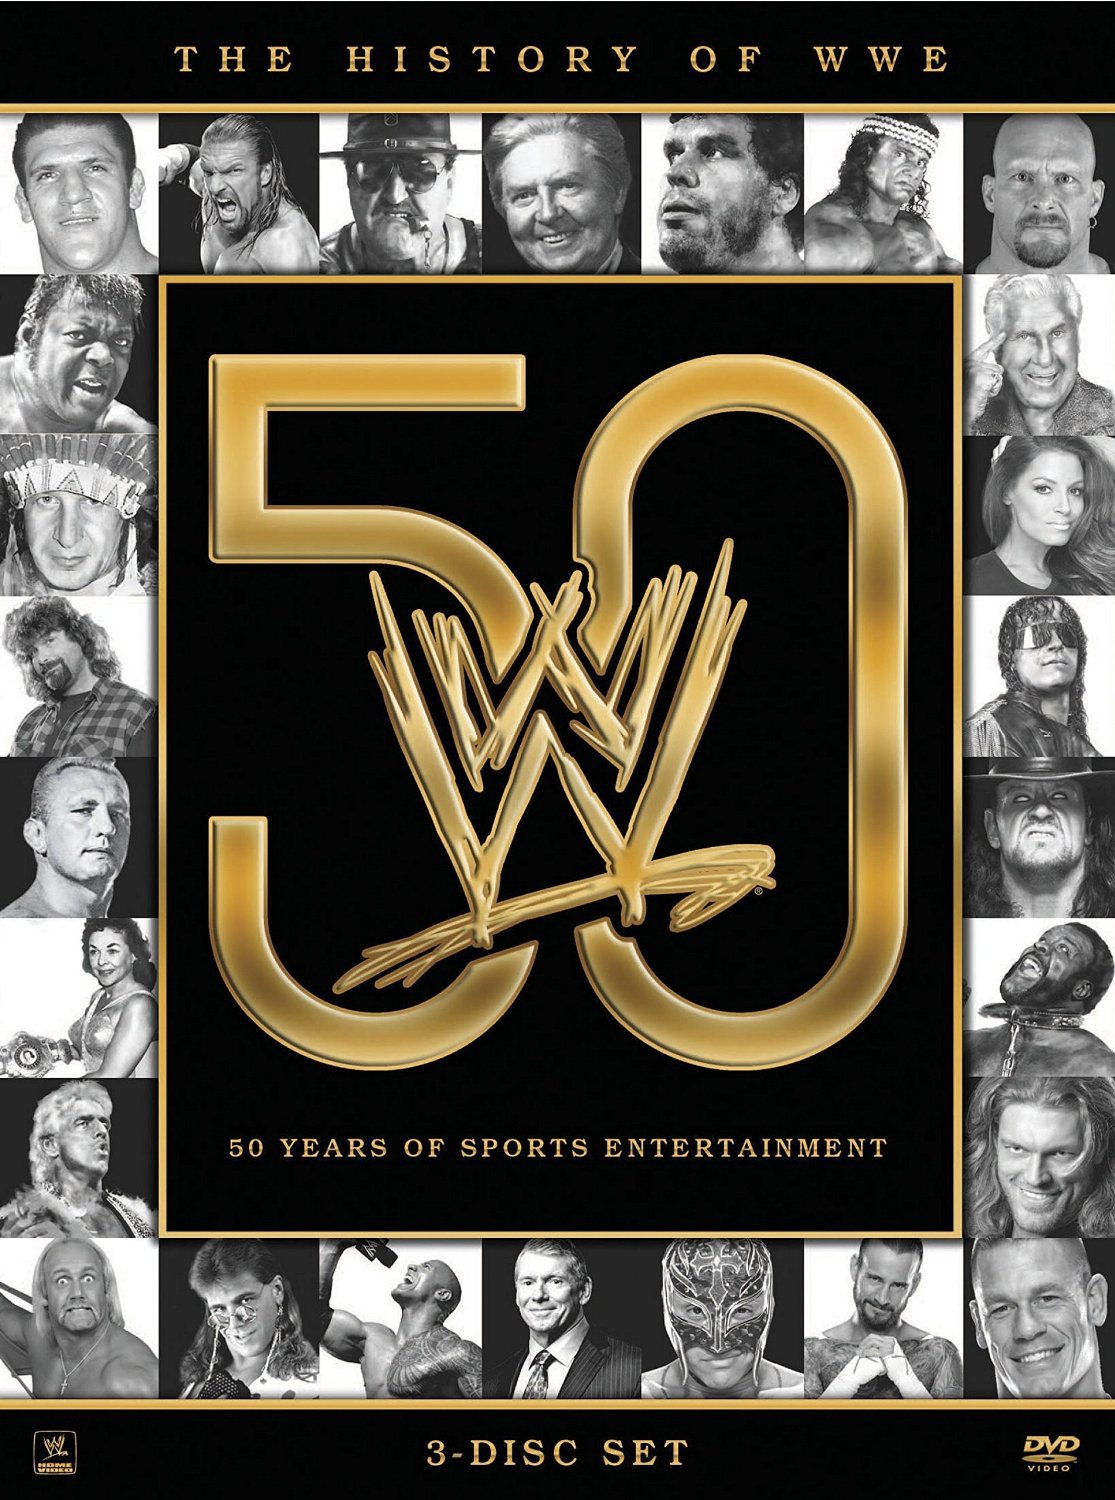 History of WWE, The